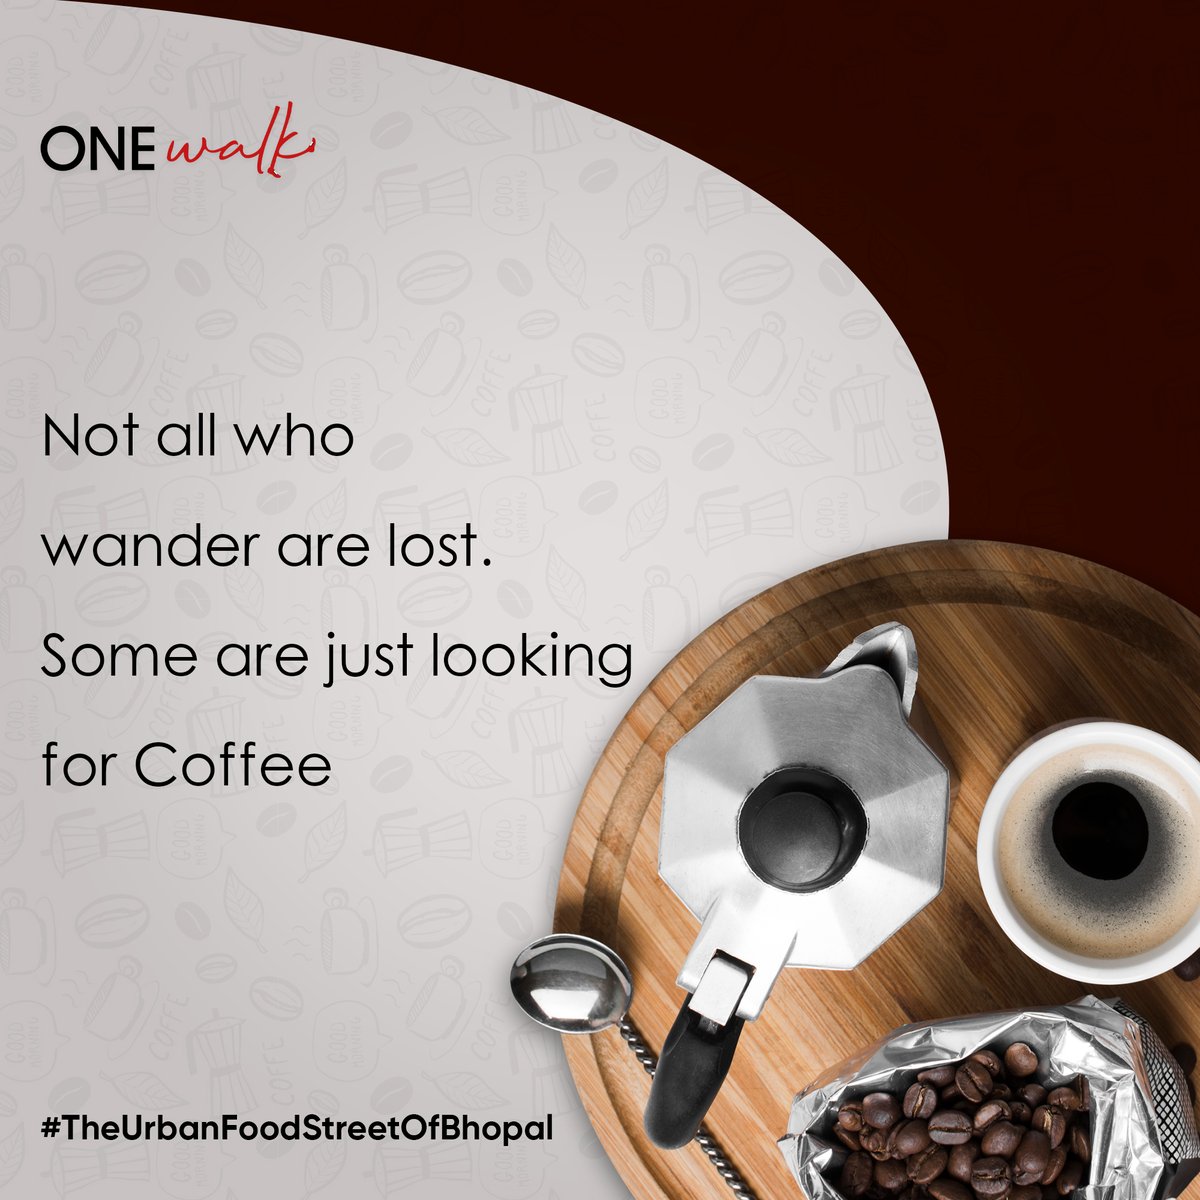 Release the boredom and de-stress with a sip of coffee☕
.
#coffee #coffeeshop #coffeetime #coffeebreak #goodfood #goodvibe #friends #family #celebrate #Onewalk #TheUrbanFoodStreetOfBhopal